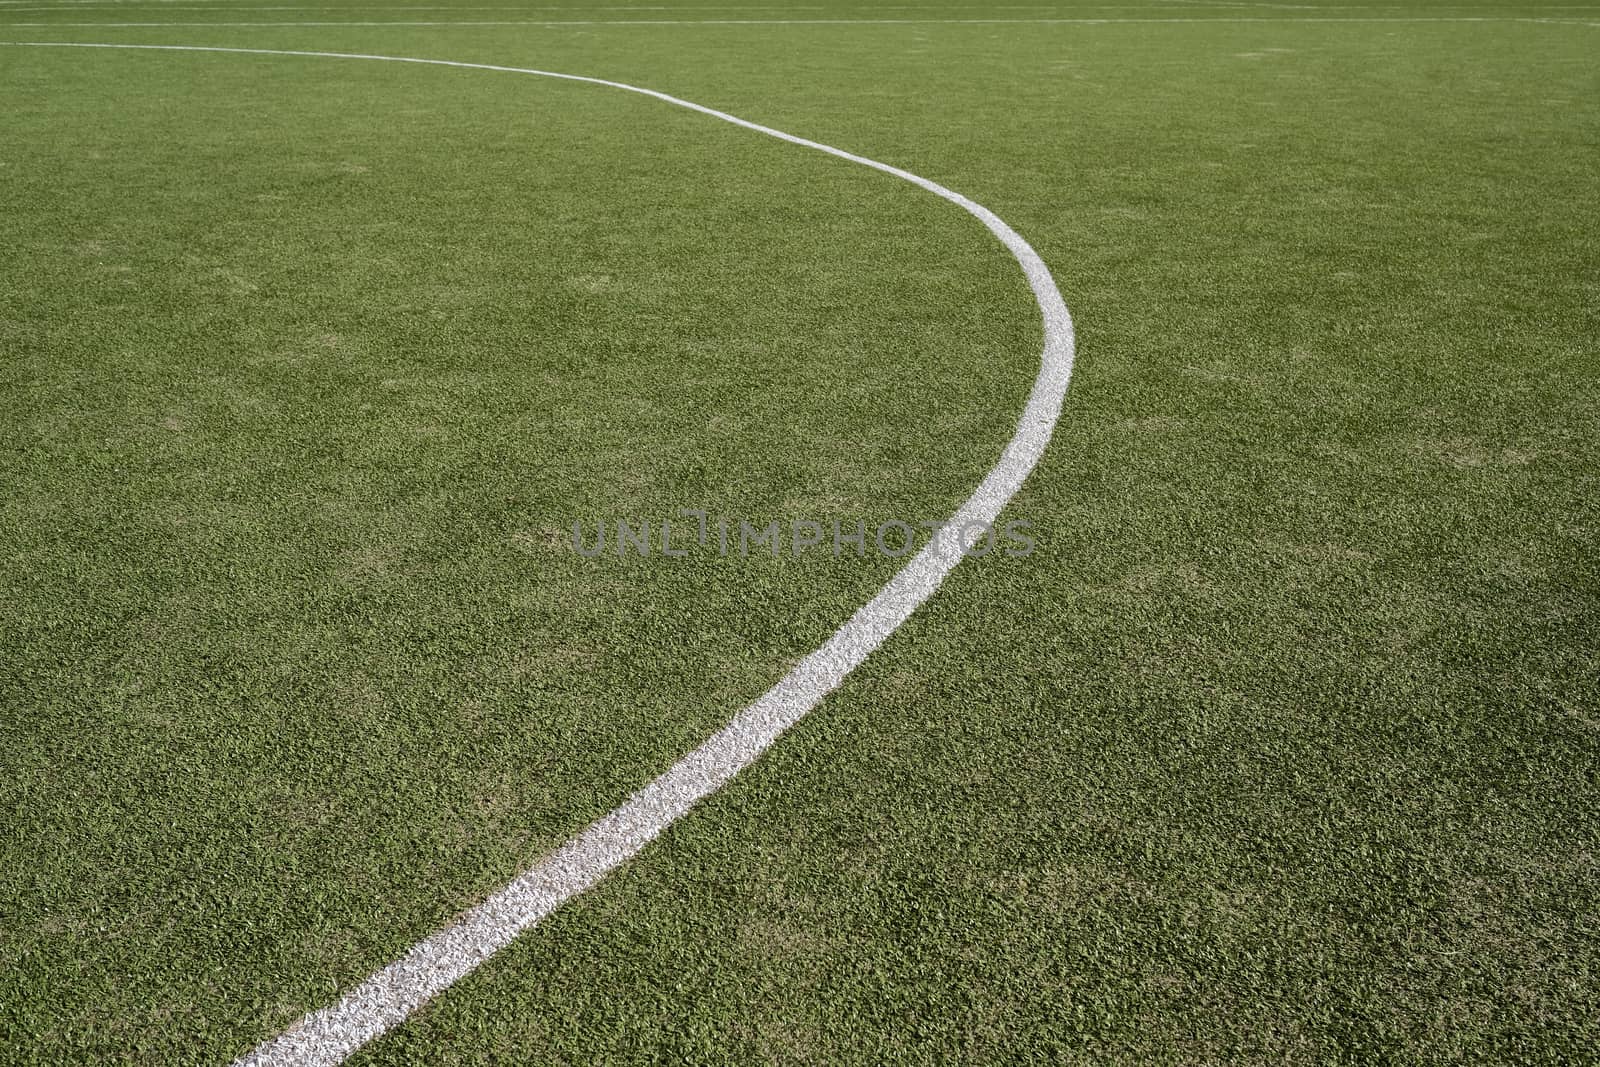 White stripe on a bright green artificial grass soccer field by Tjeerdkruse